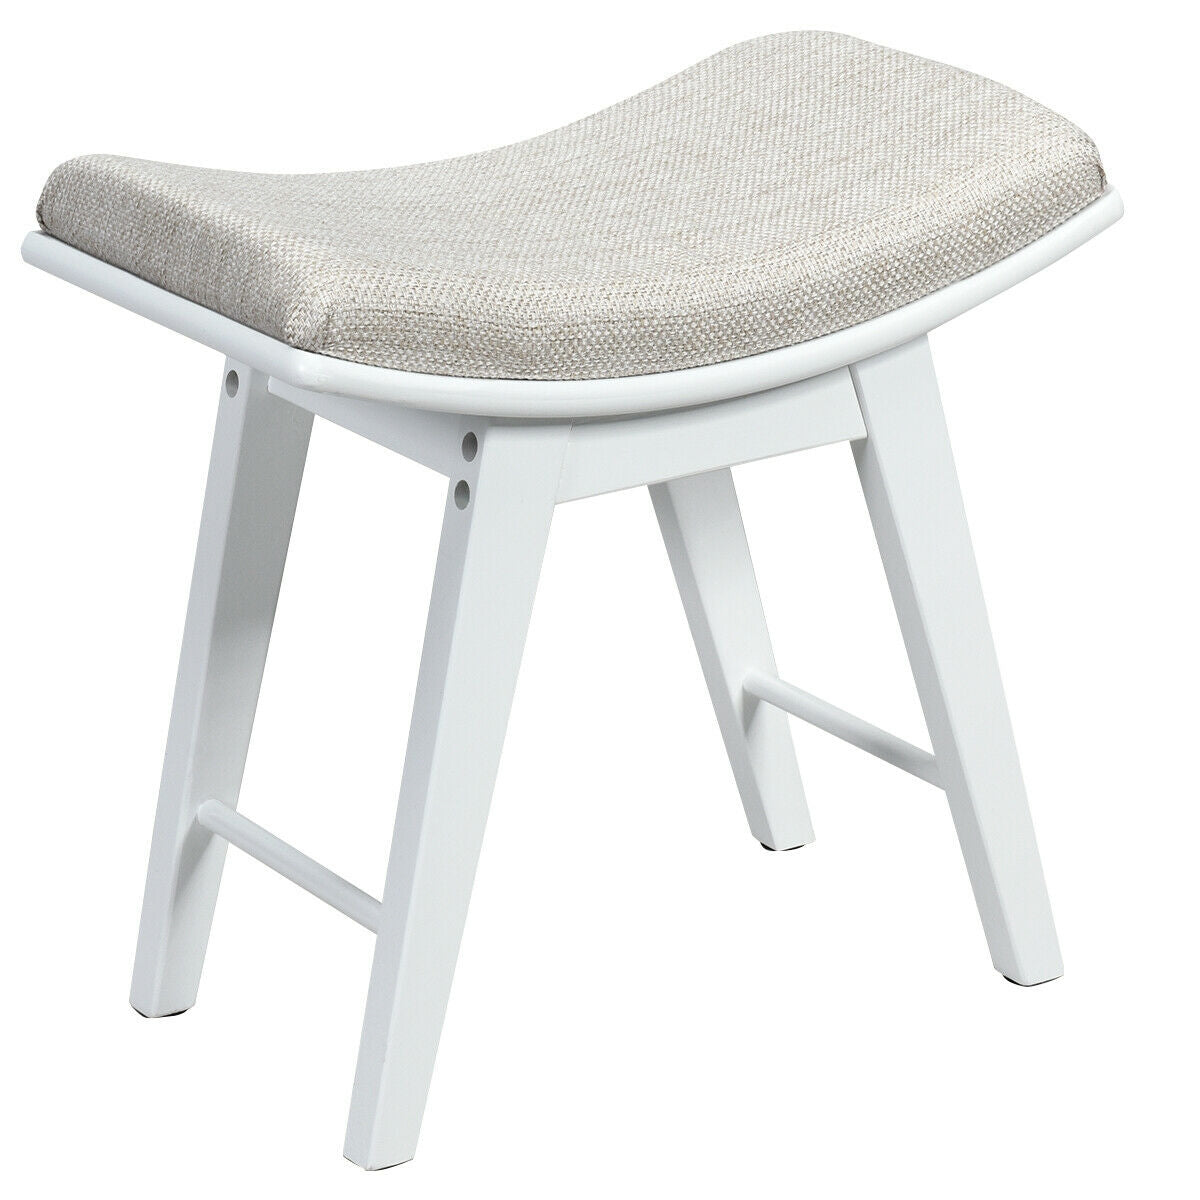 Modern Dressing Makeup Stool with Concave Seat Rubberwood Legs-White